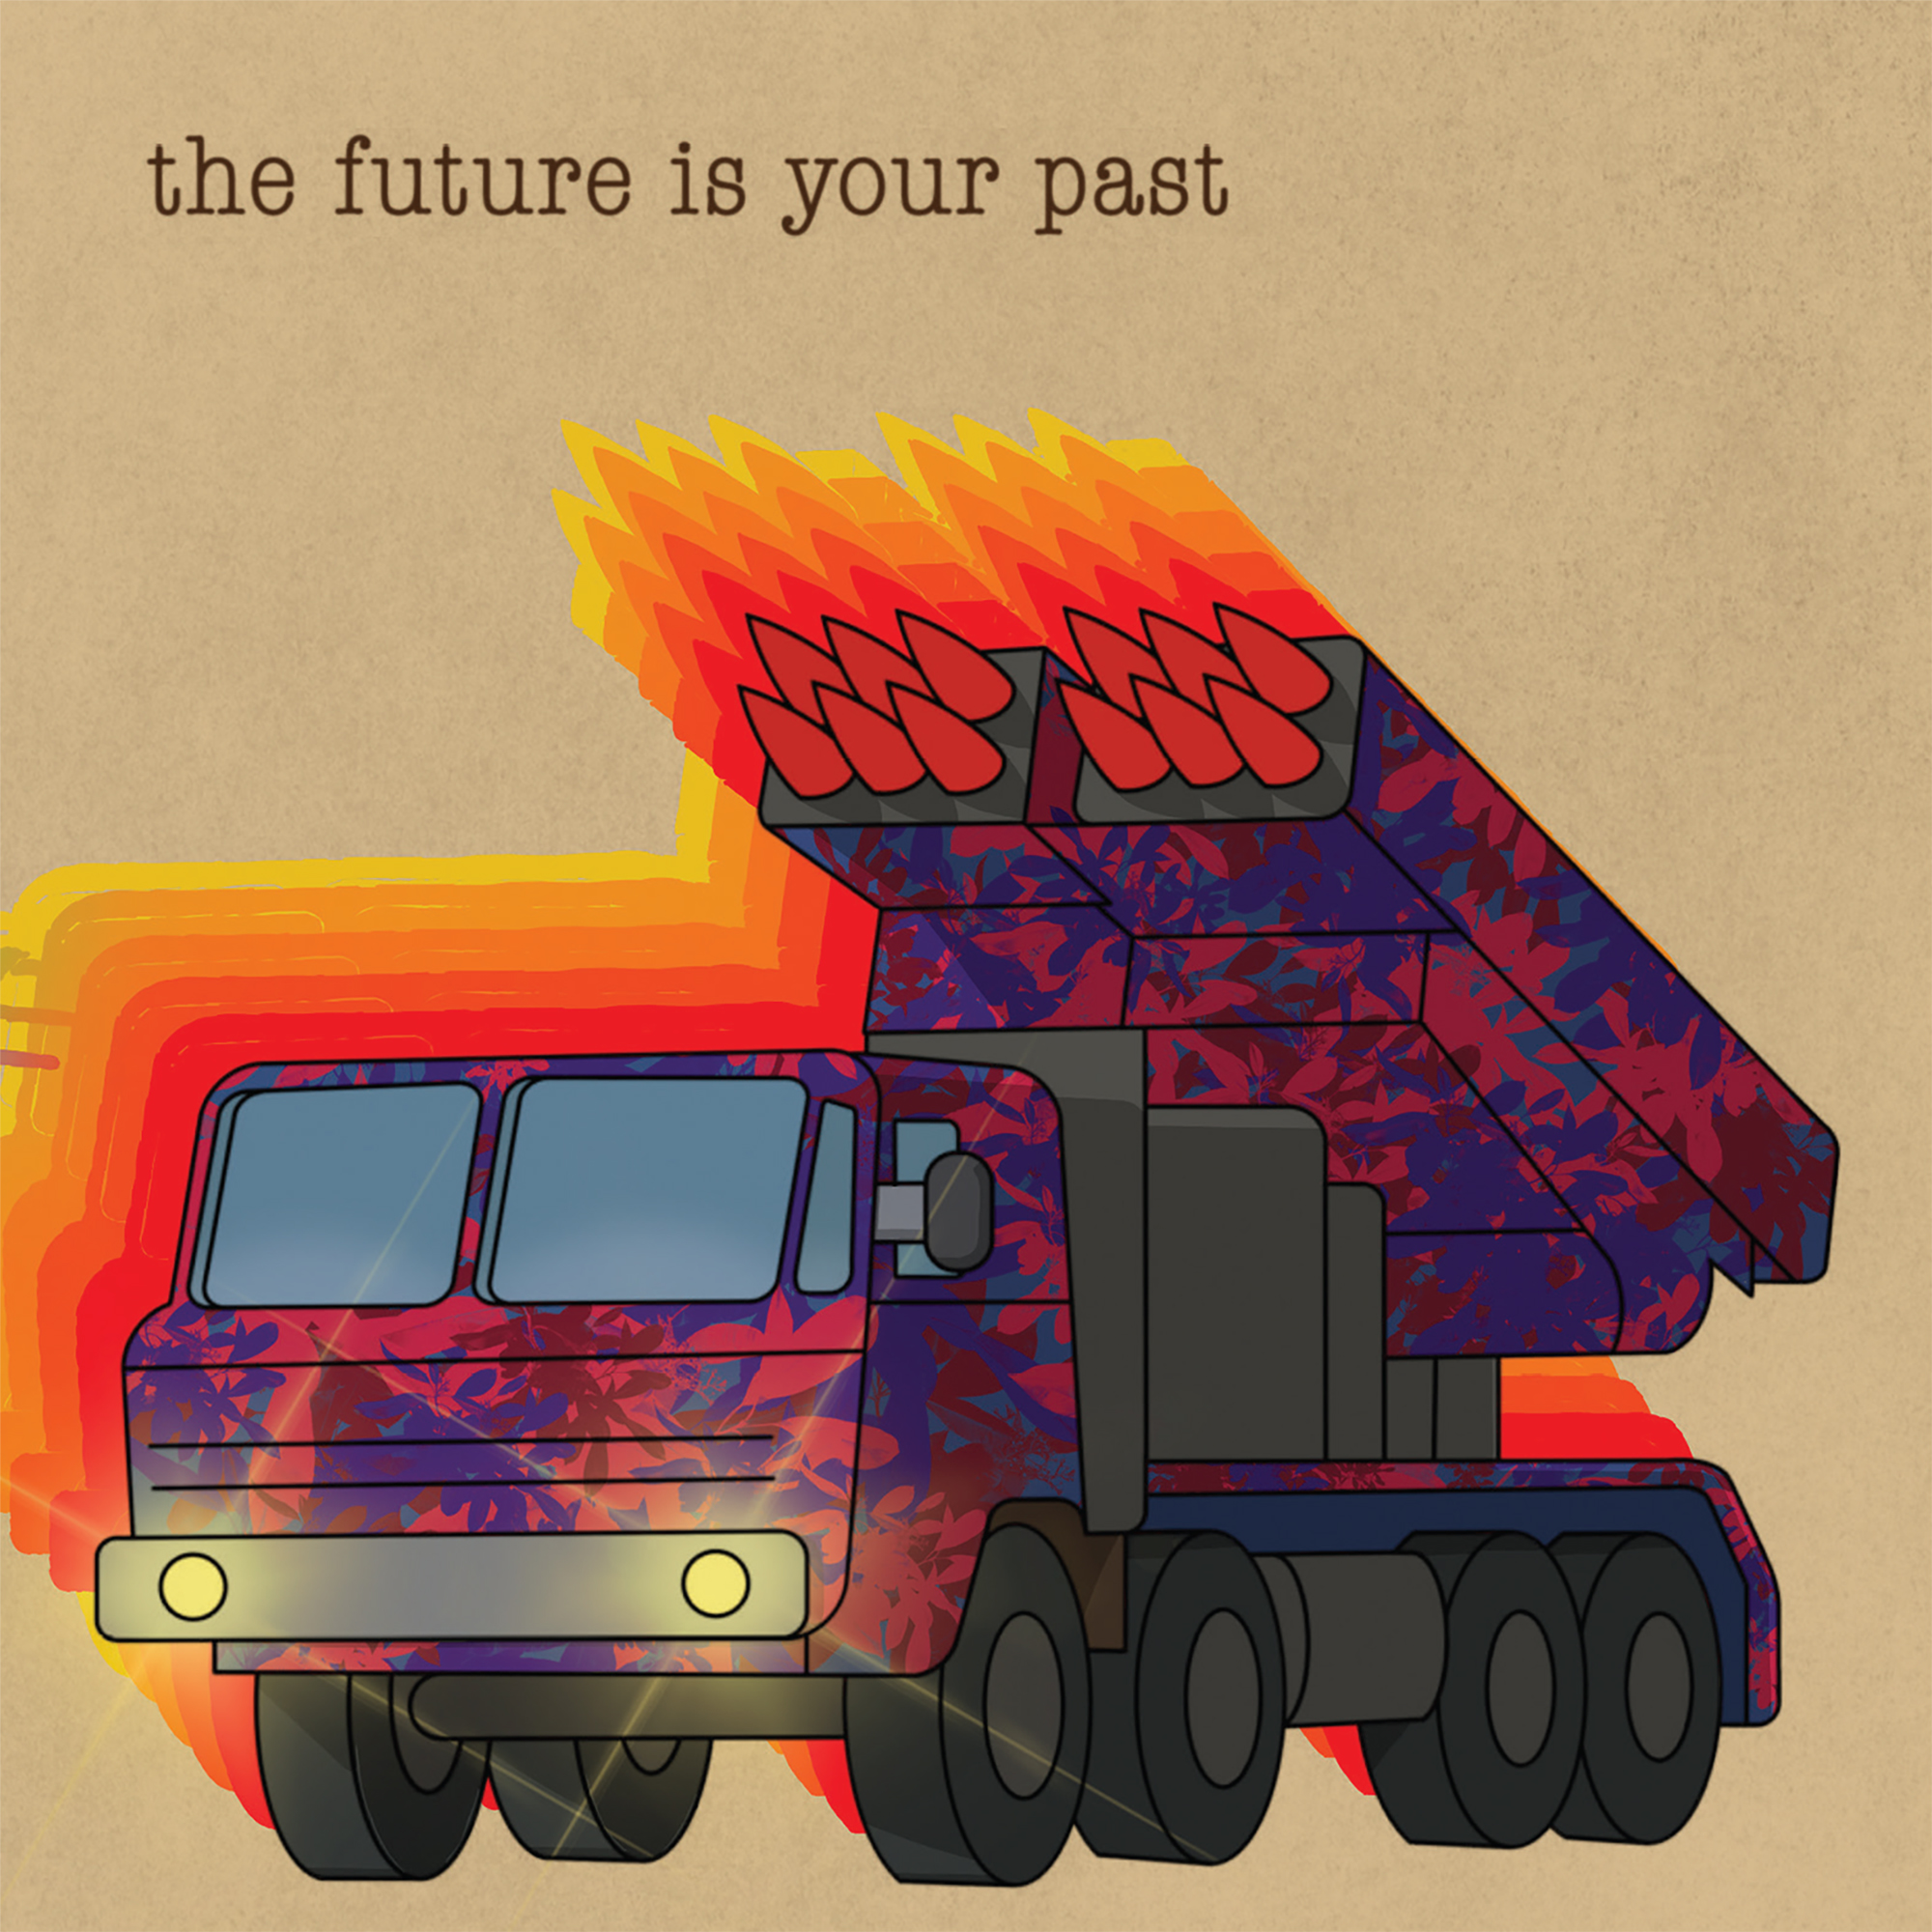 The Future Is Your Past album cover